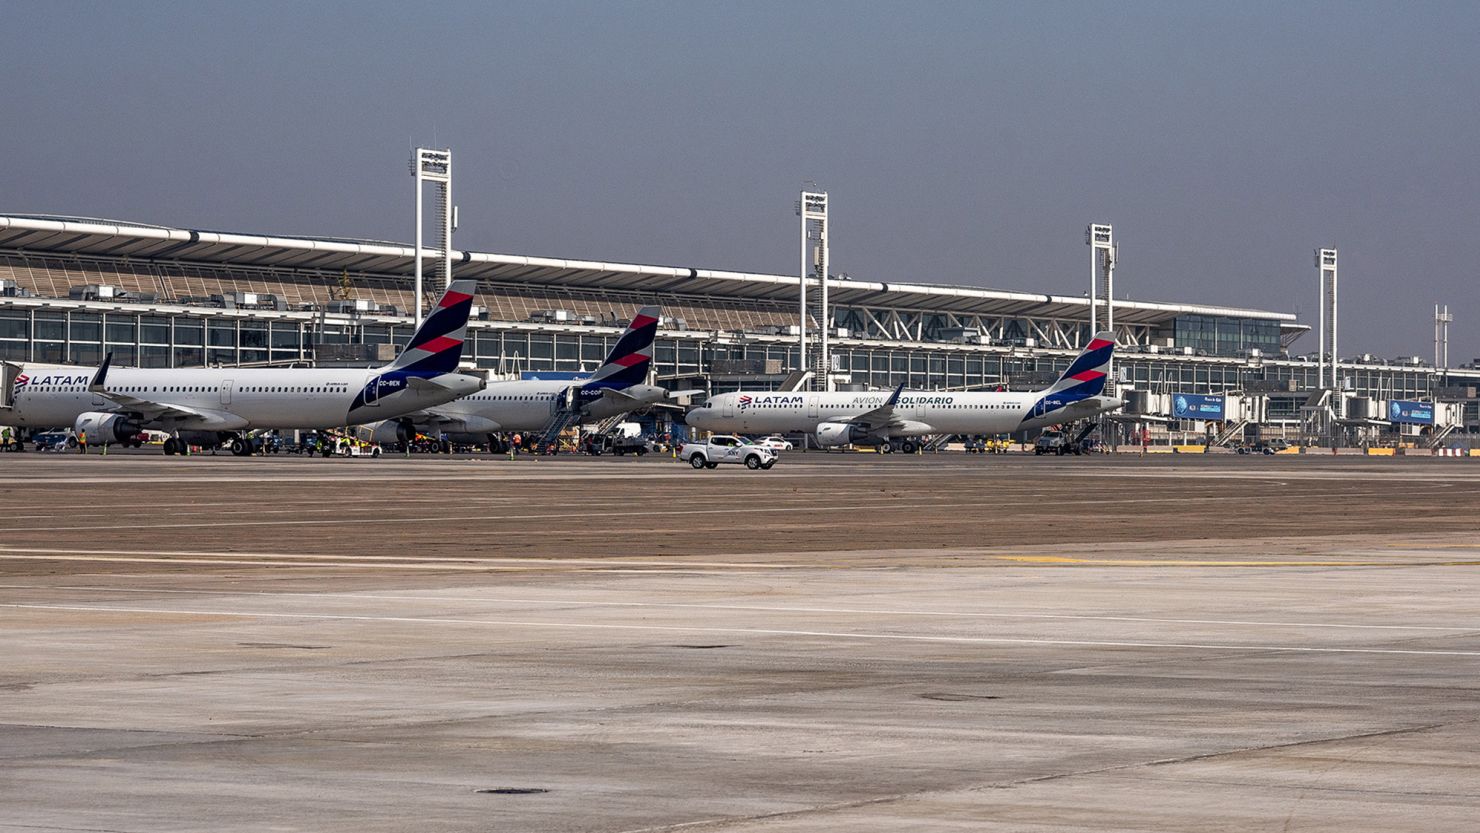 LATAM Airlines aircraft pictured in Santiago, Chile, on May 5.